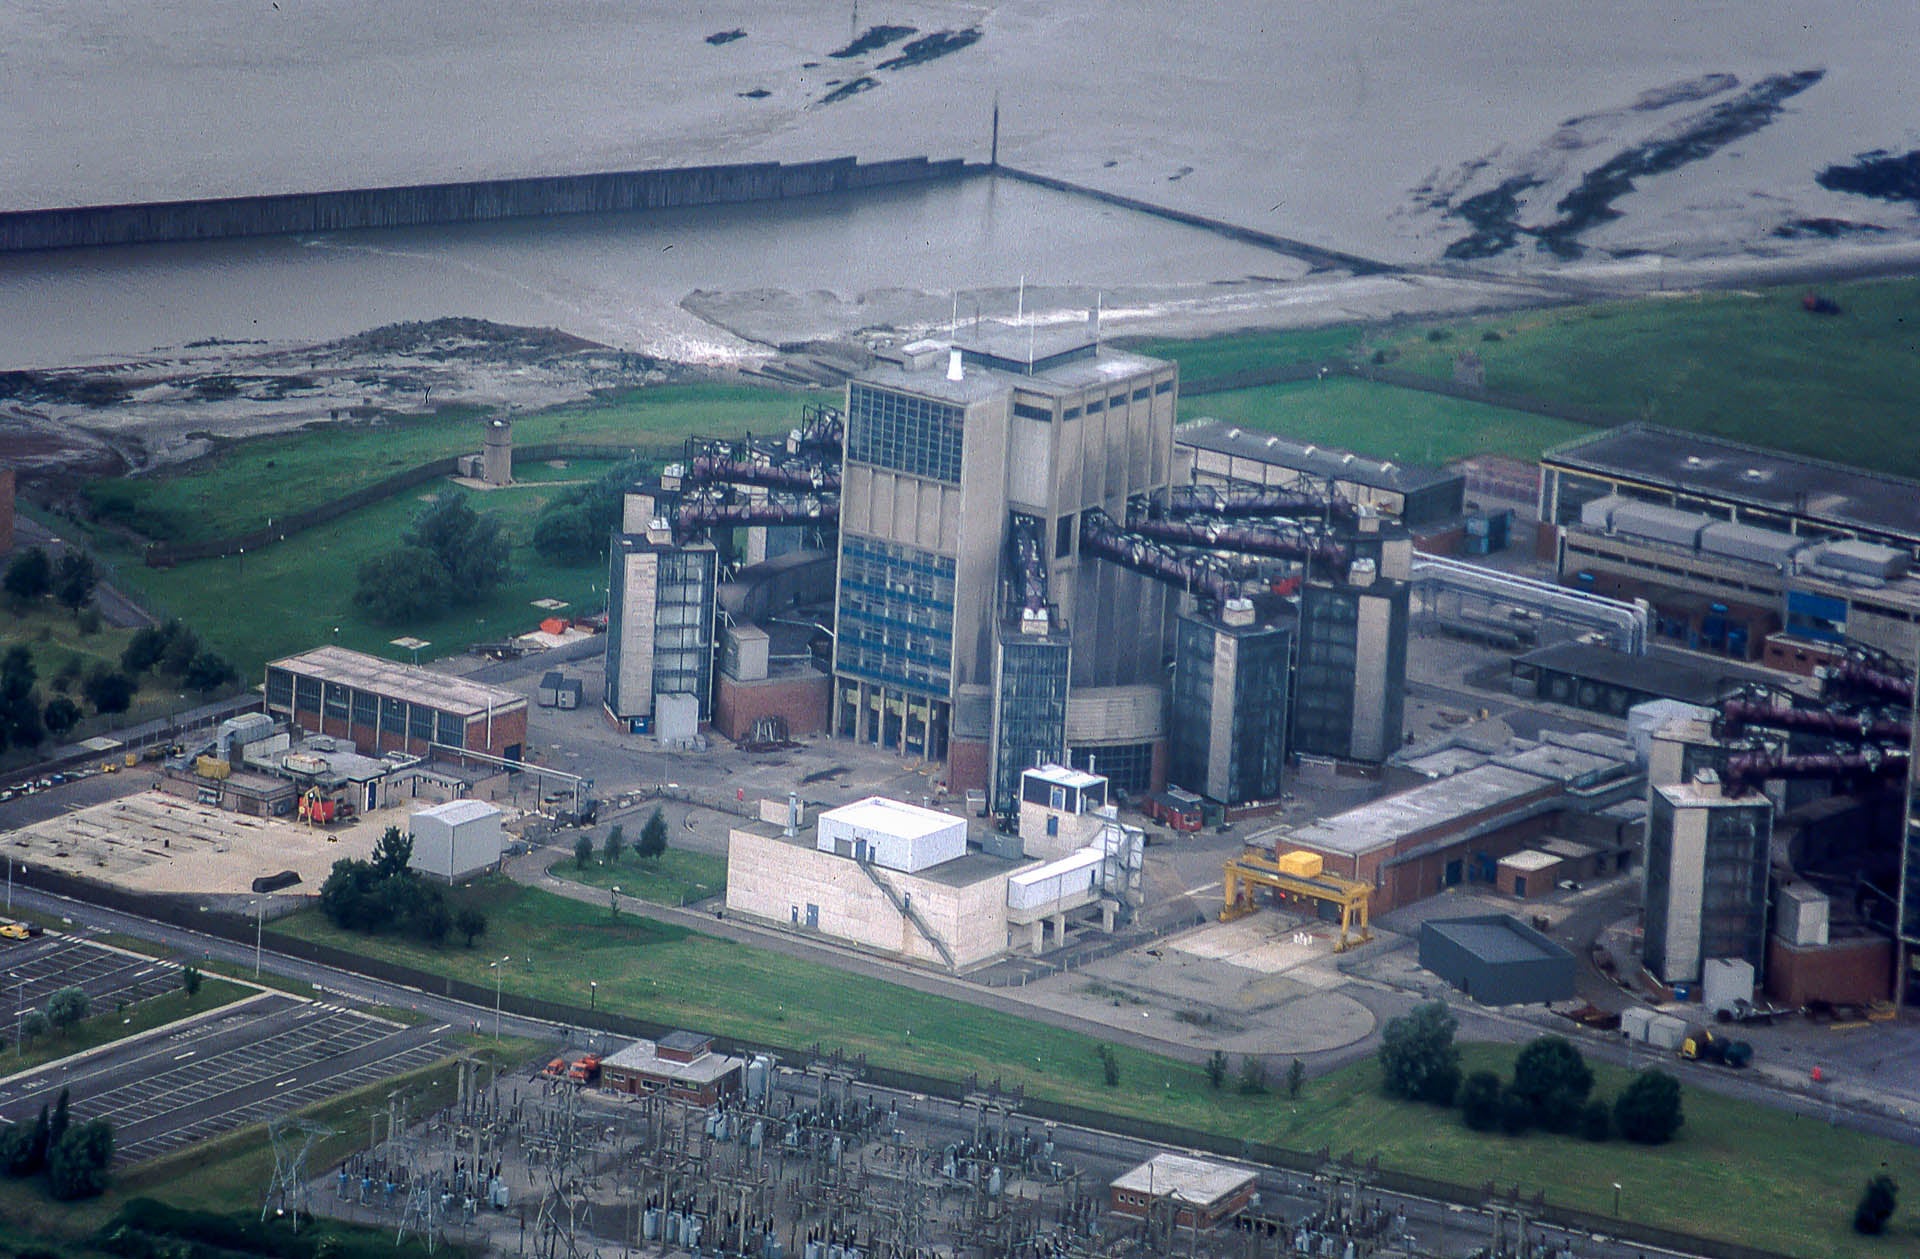 Berkeley nuclear power station in Gloucestershire, pictured in 1981, was decommissioned in 1989